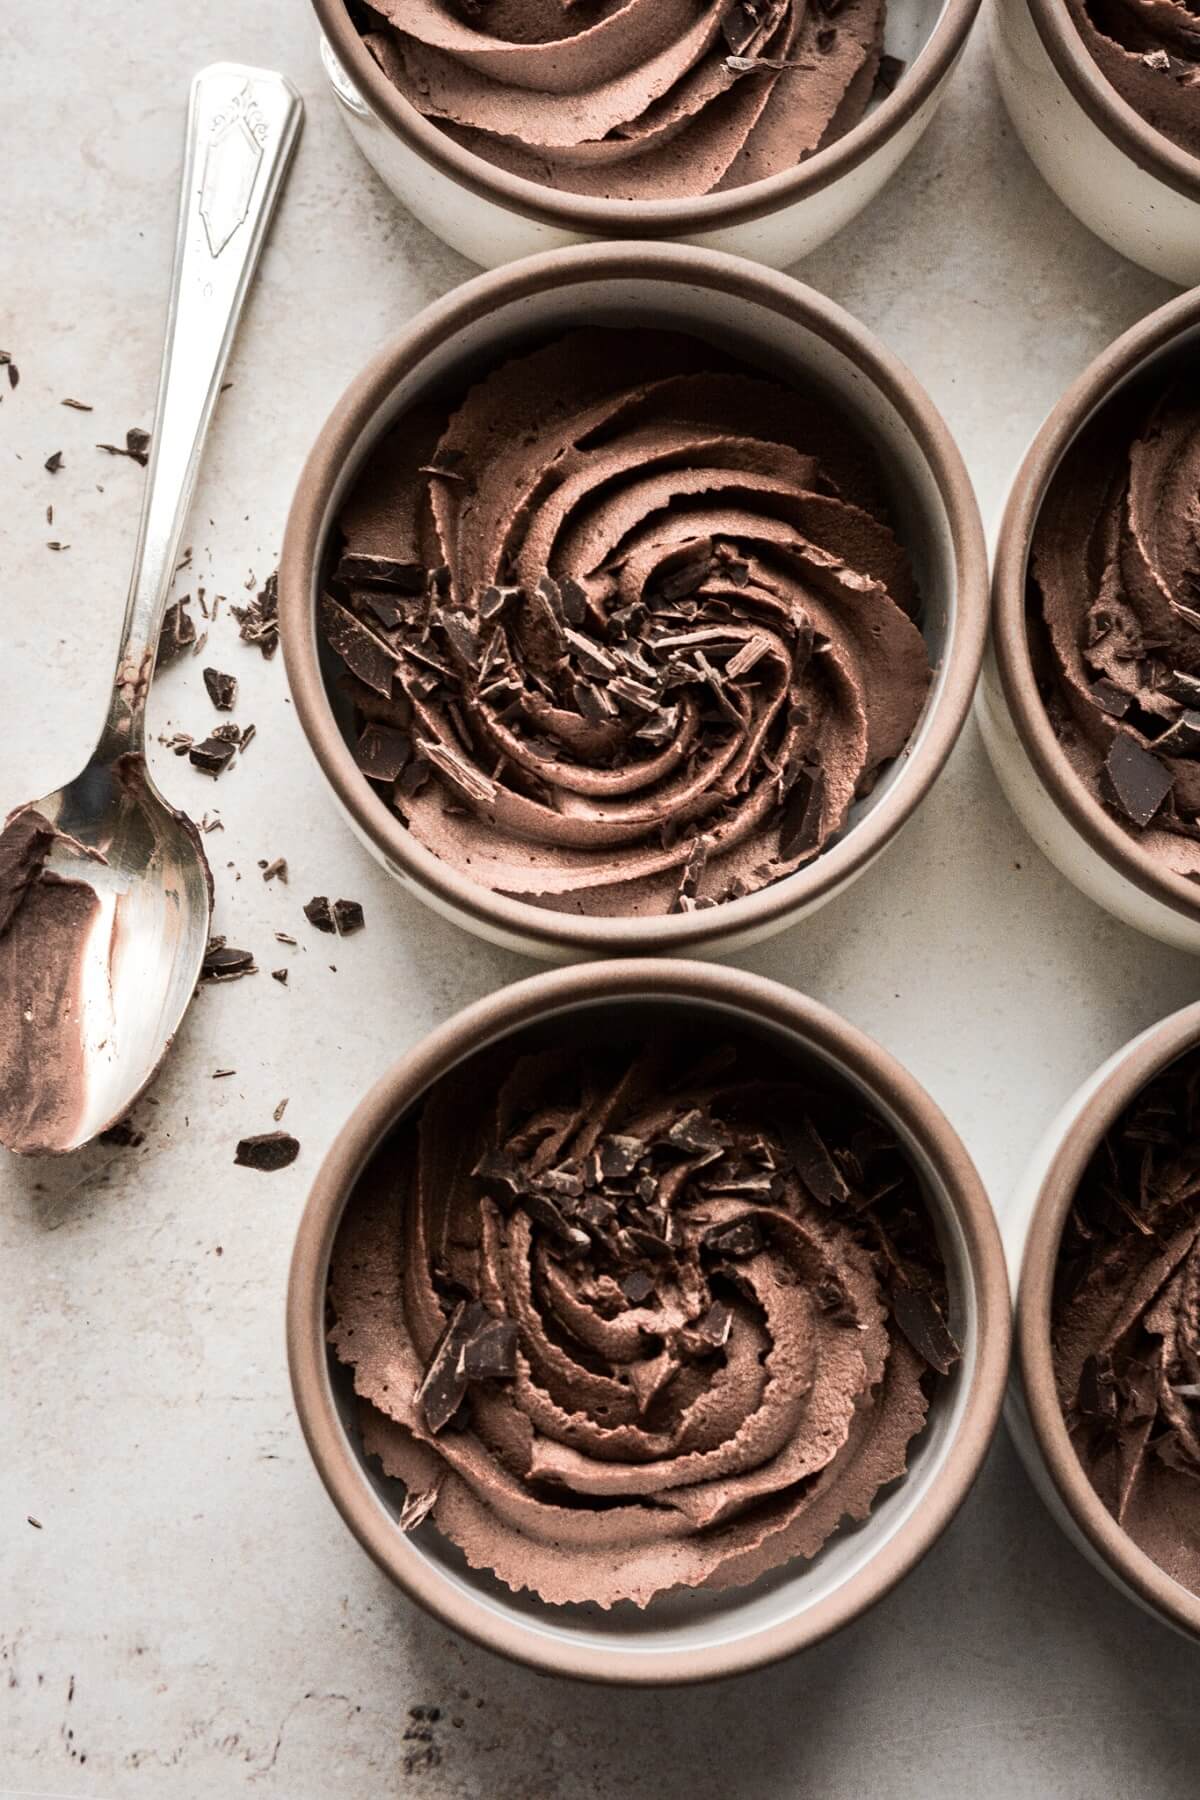 Chocolate espresso mousse topped with chopped chocolate.